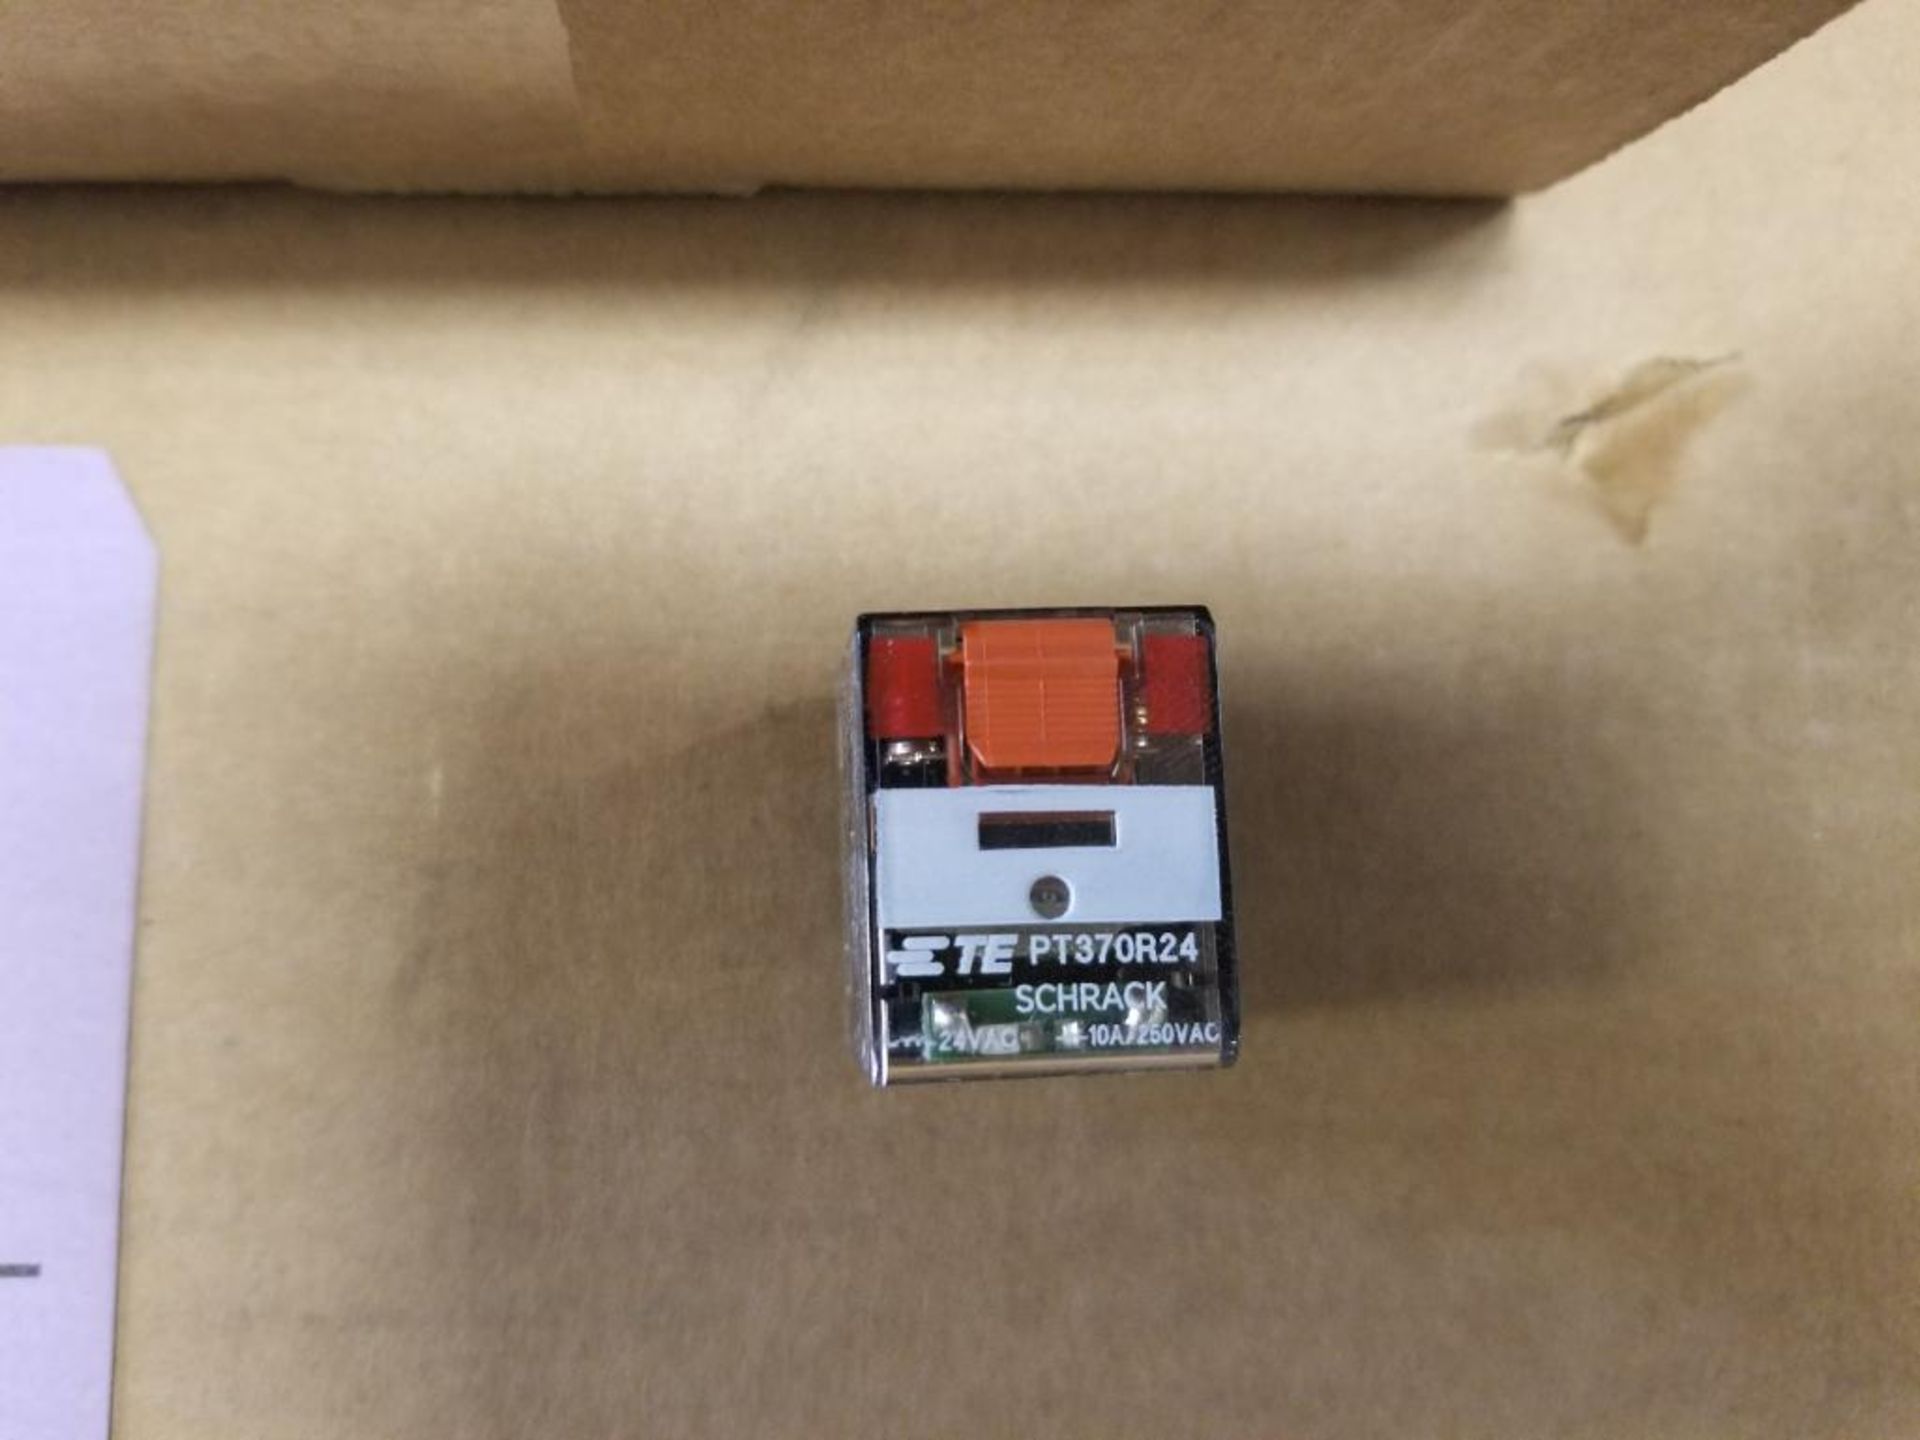 Qty 160 - TE Connectivity Schrack power relay. Part number PT370R24. New in bulk pack. - Image 5 of 5